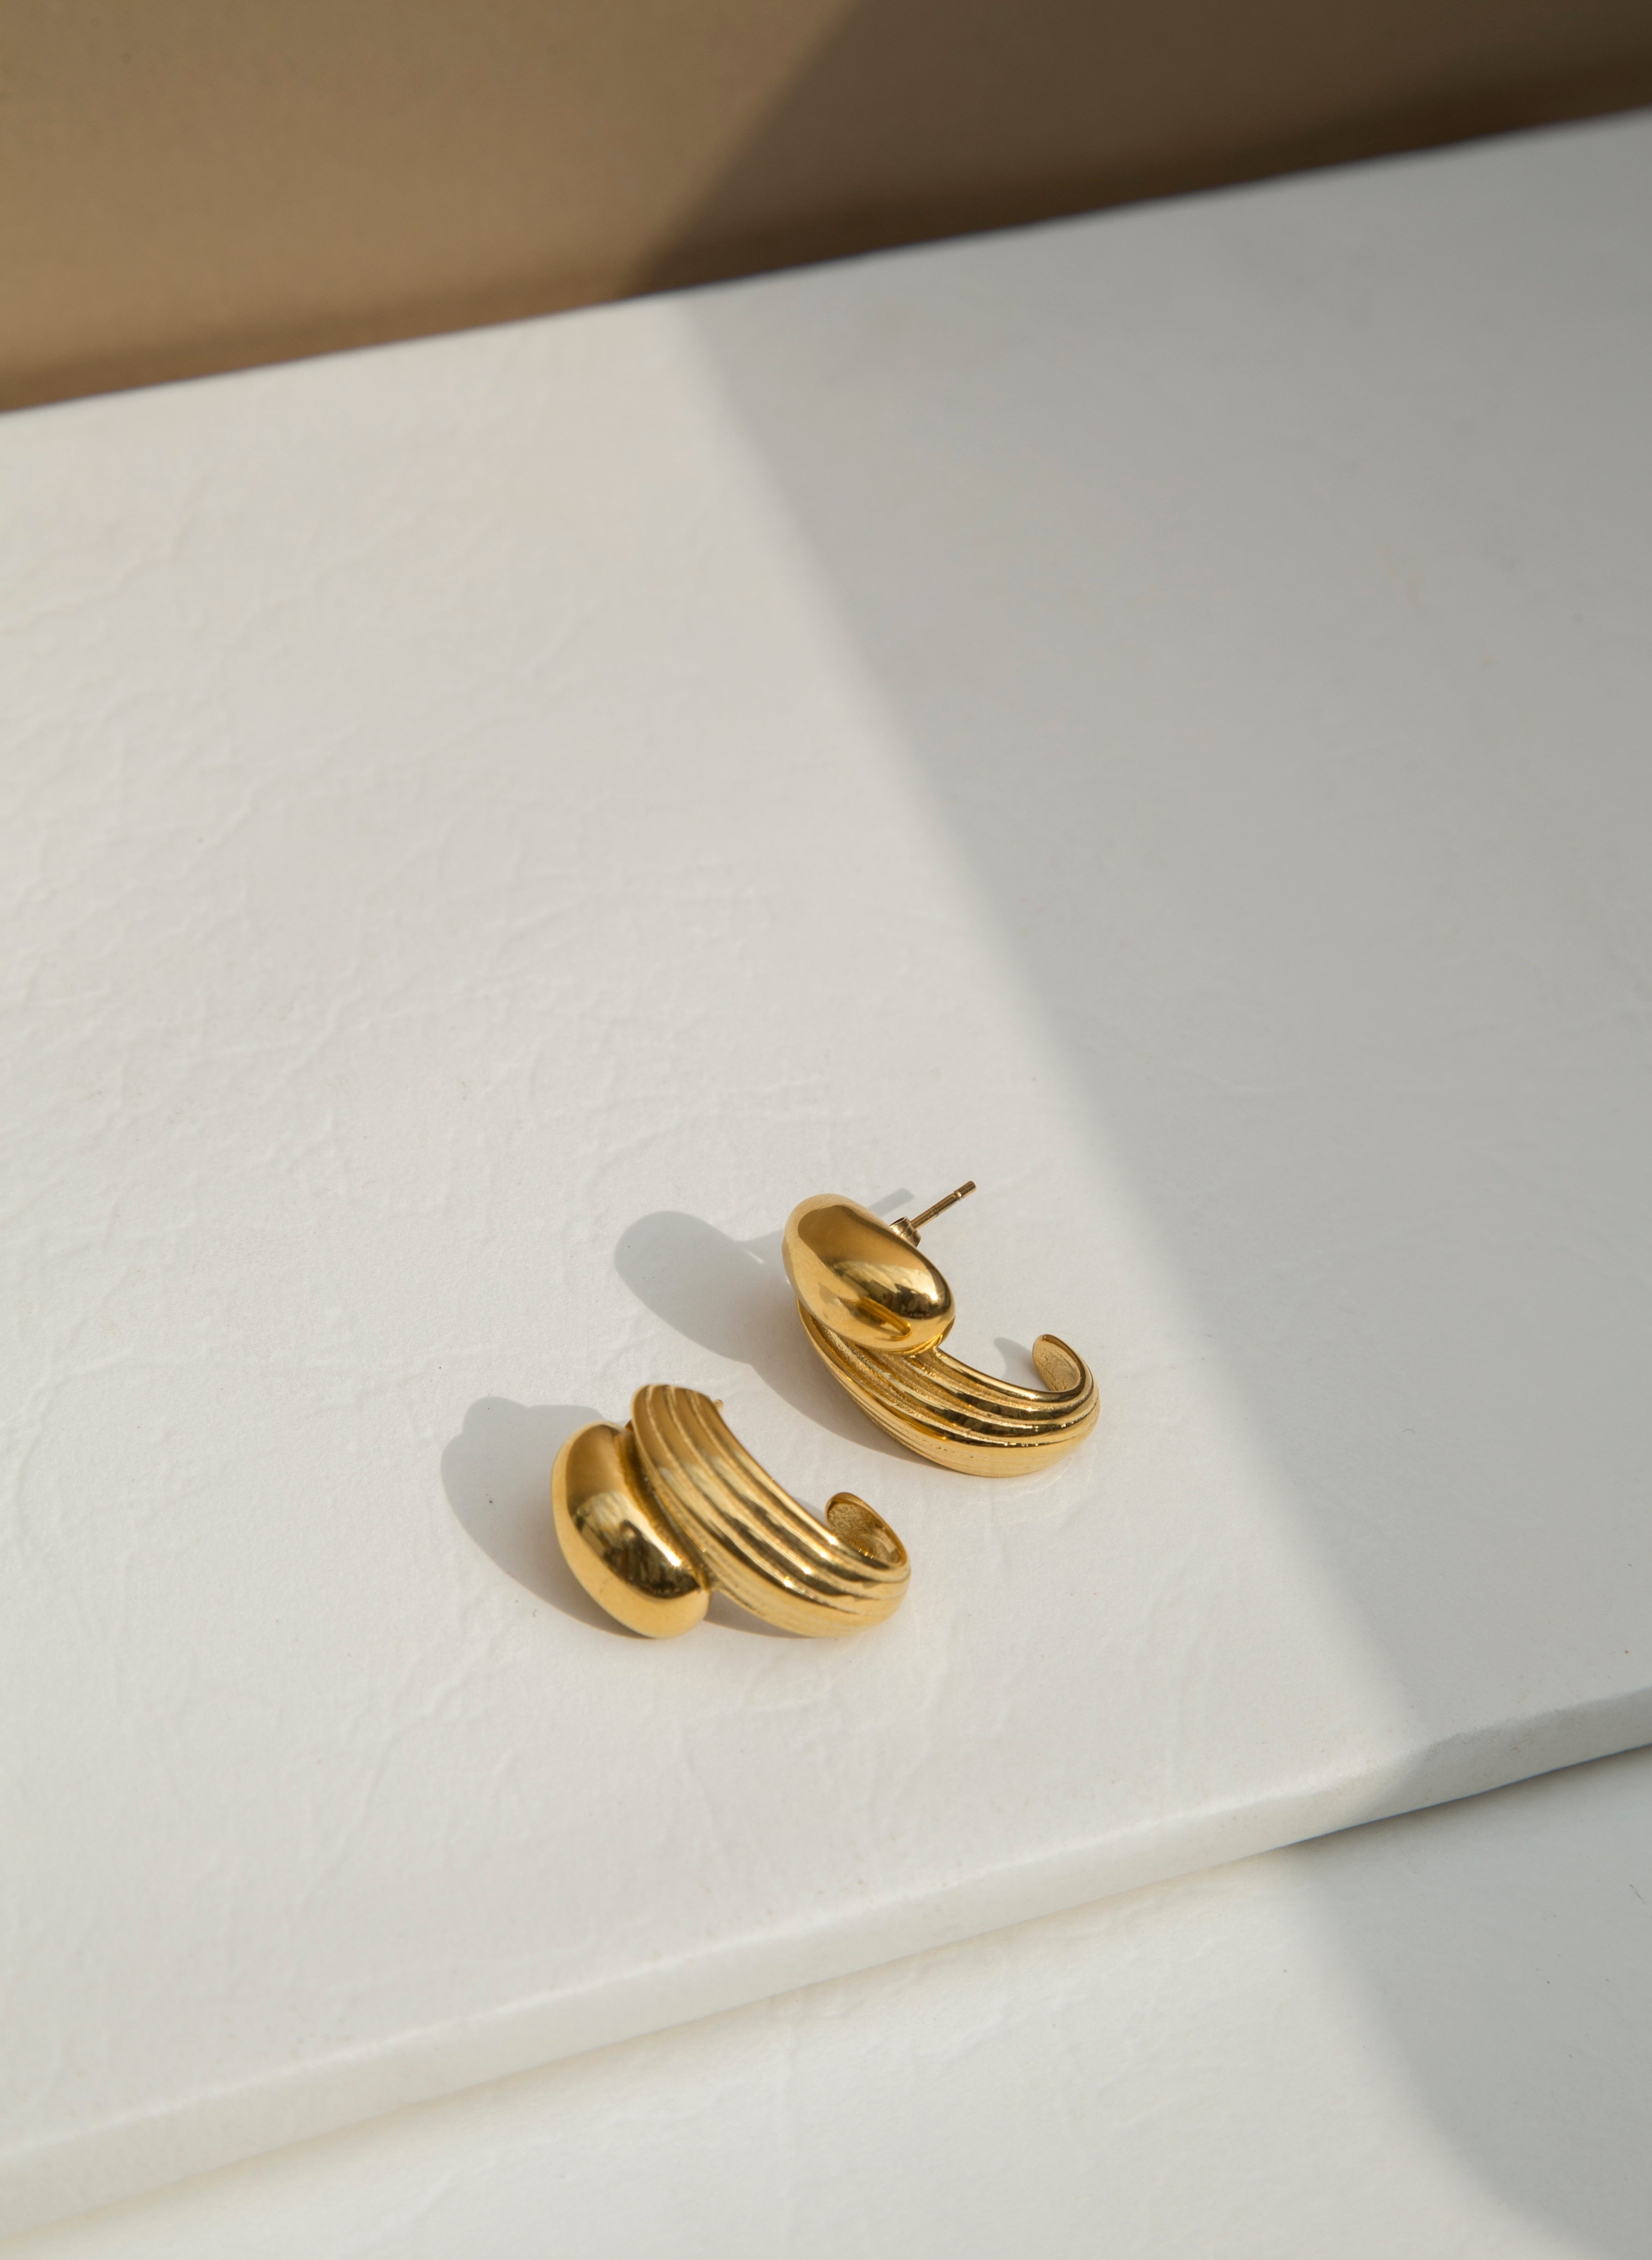 Material : Stainless Steel  - 18K Gold Plated   - Hypoallergenic   - Tarnish & Water Resistant   Dimension :Length 2.3cm   Weight : About 11g    Make a statement with our Dune Stud Earrings. The captivating spliced C-shape design, combined with a textured surface, creates a contemporary artistic touch that sets these studs apart. Bold and chunky, these statement earrings are crafted to make an impact that resonates with your modern sensibilities.